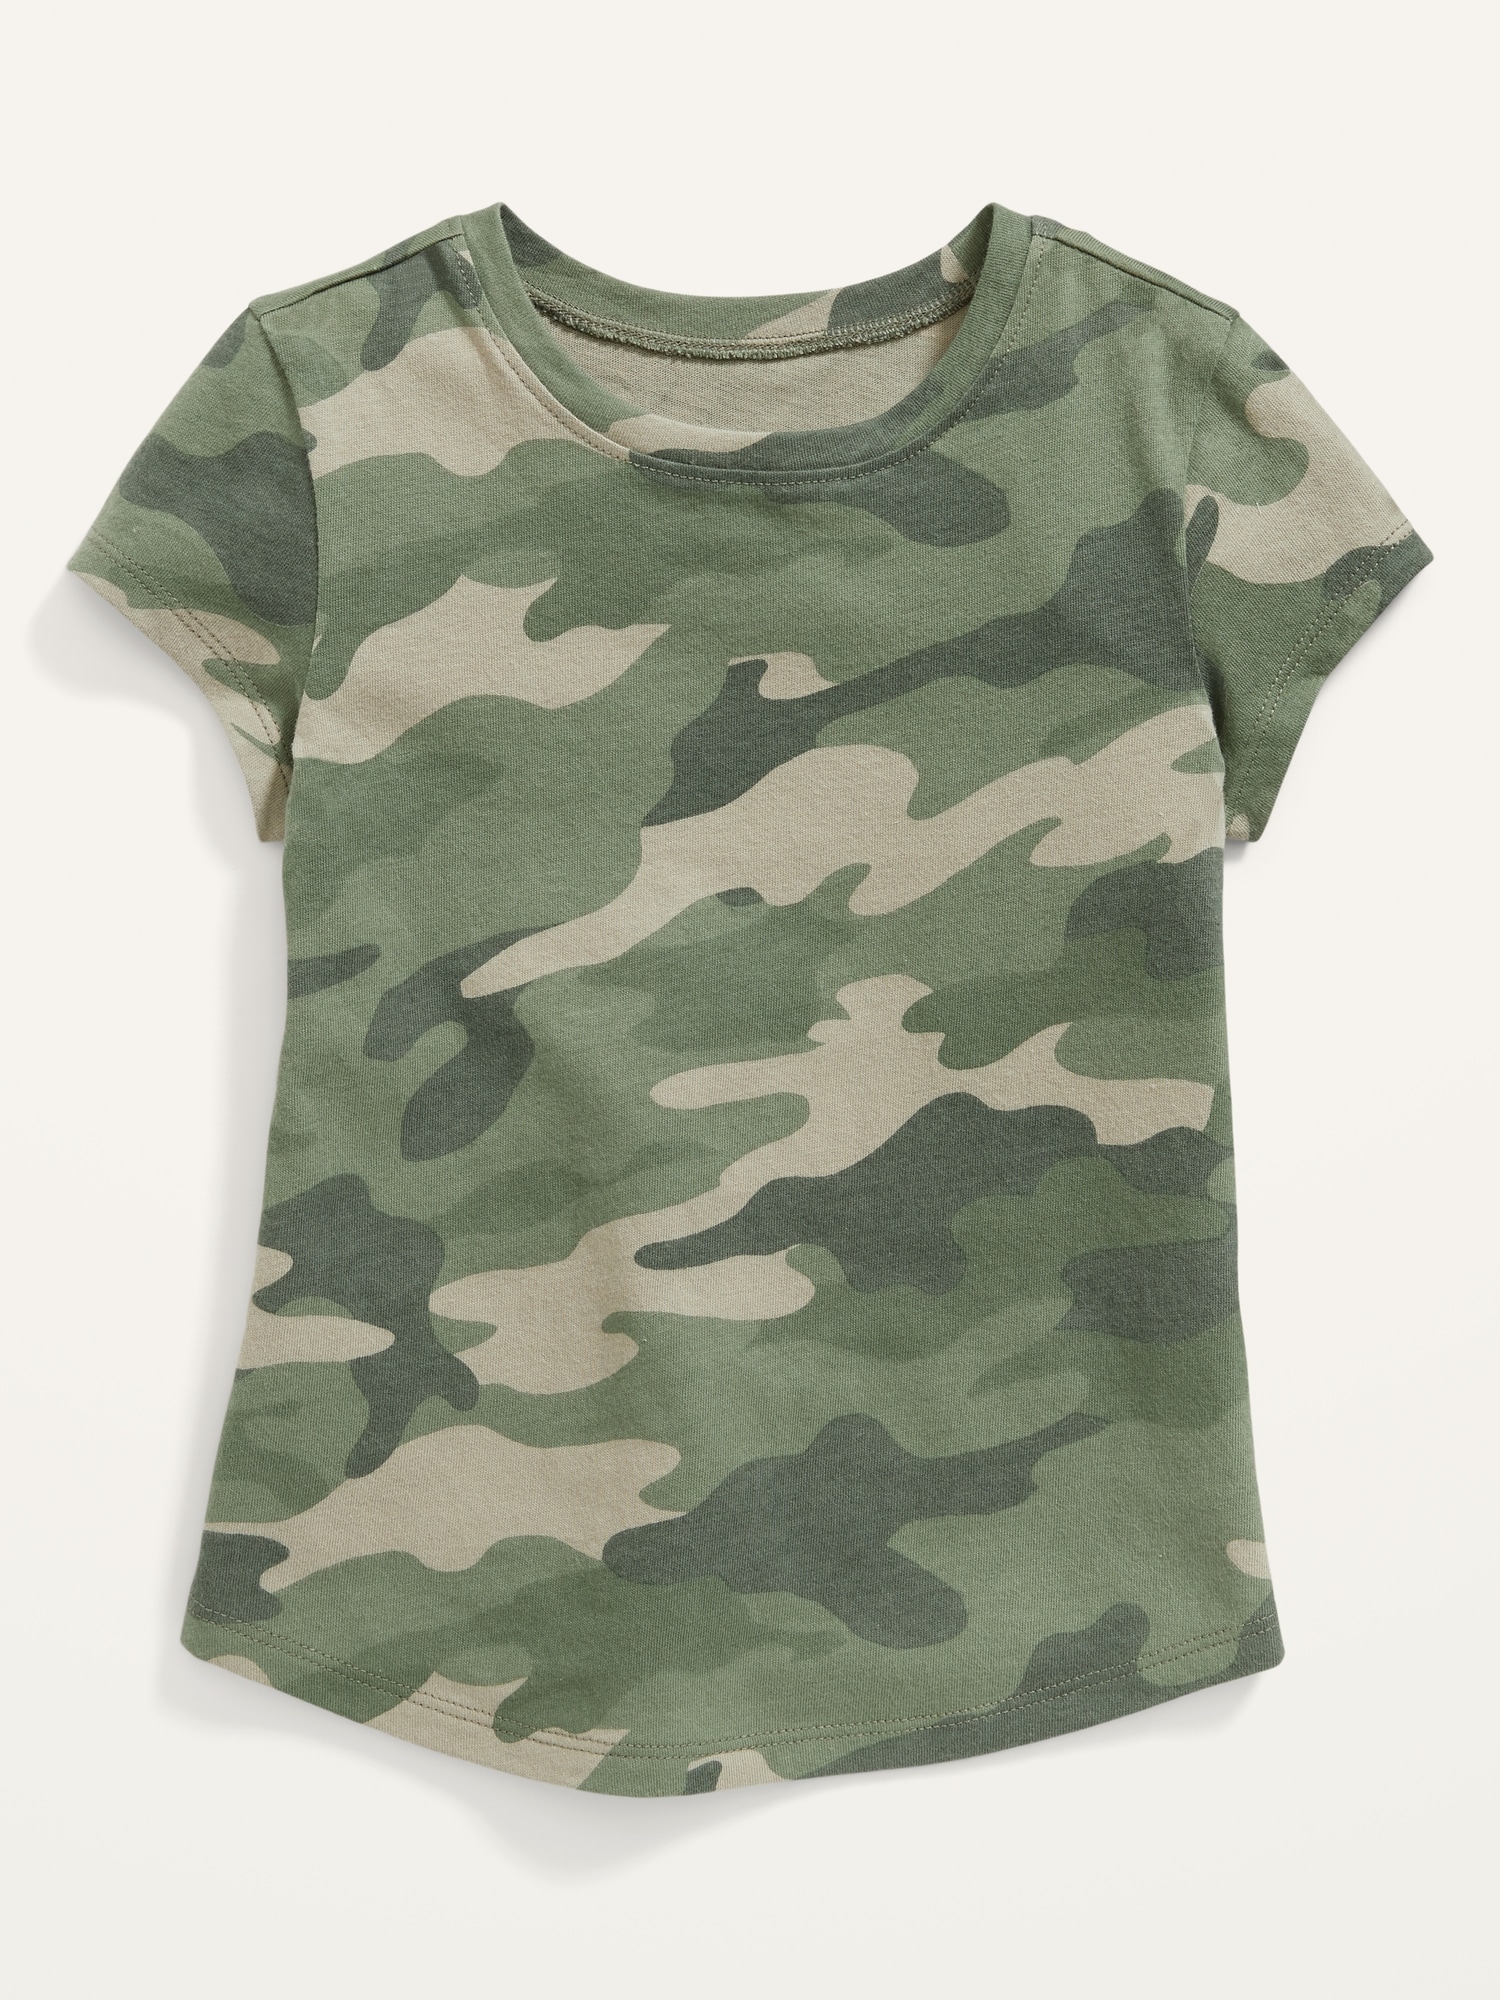 Old Navy Unisex Short-Sleeve Camo T-Shirt for Toddler - Multi - Size 3T